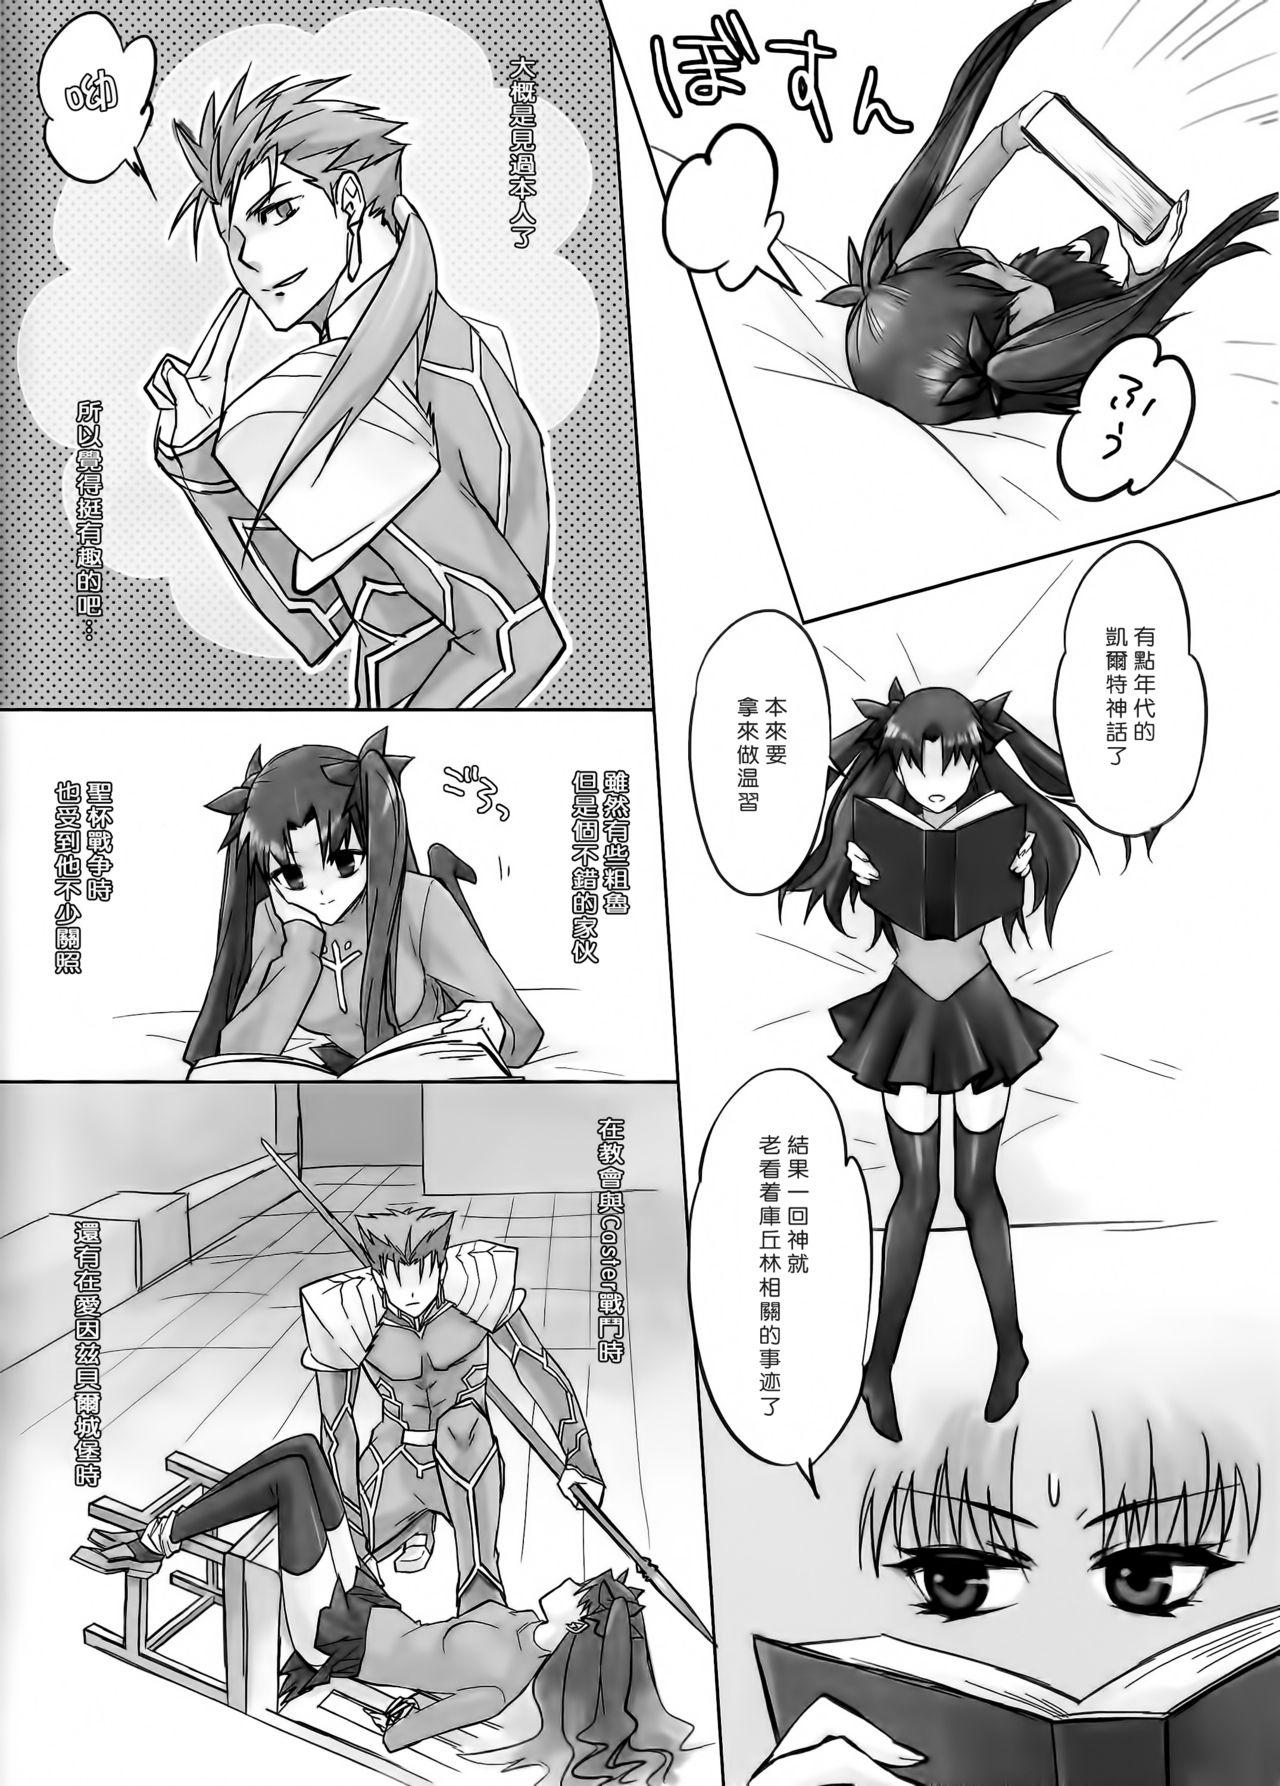 Lolicon BLUE ECLIPSE - Fate stay night With - Page 4